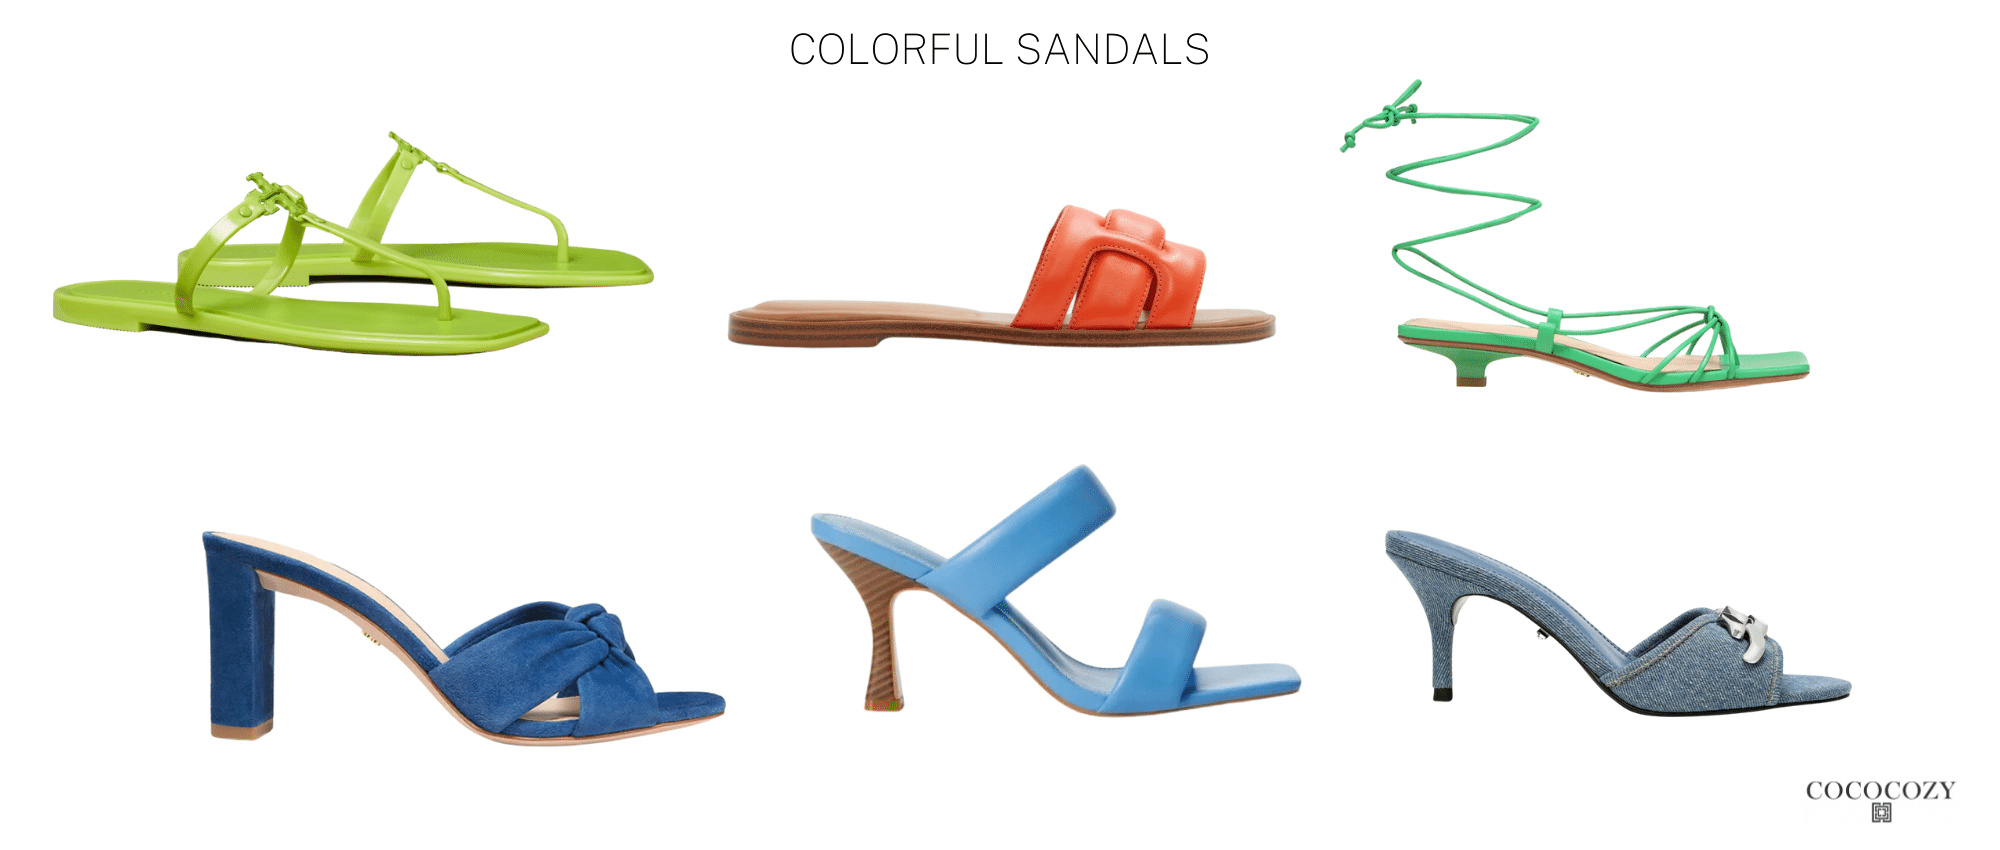 Alt tag for sandals-shoes-spring-colorful-veronica-beard-cococozy